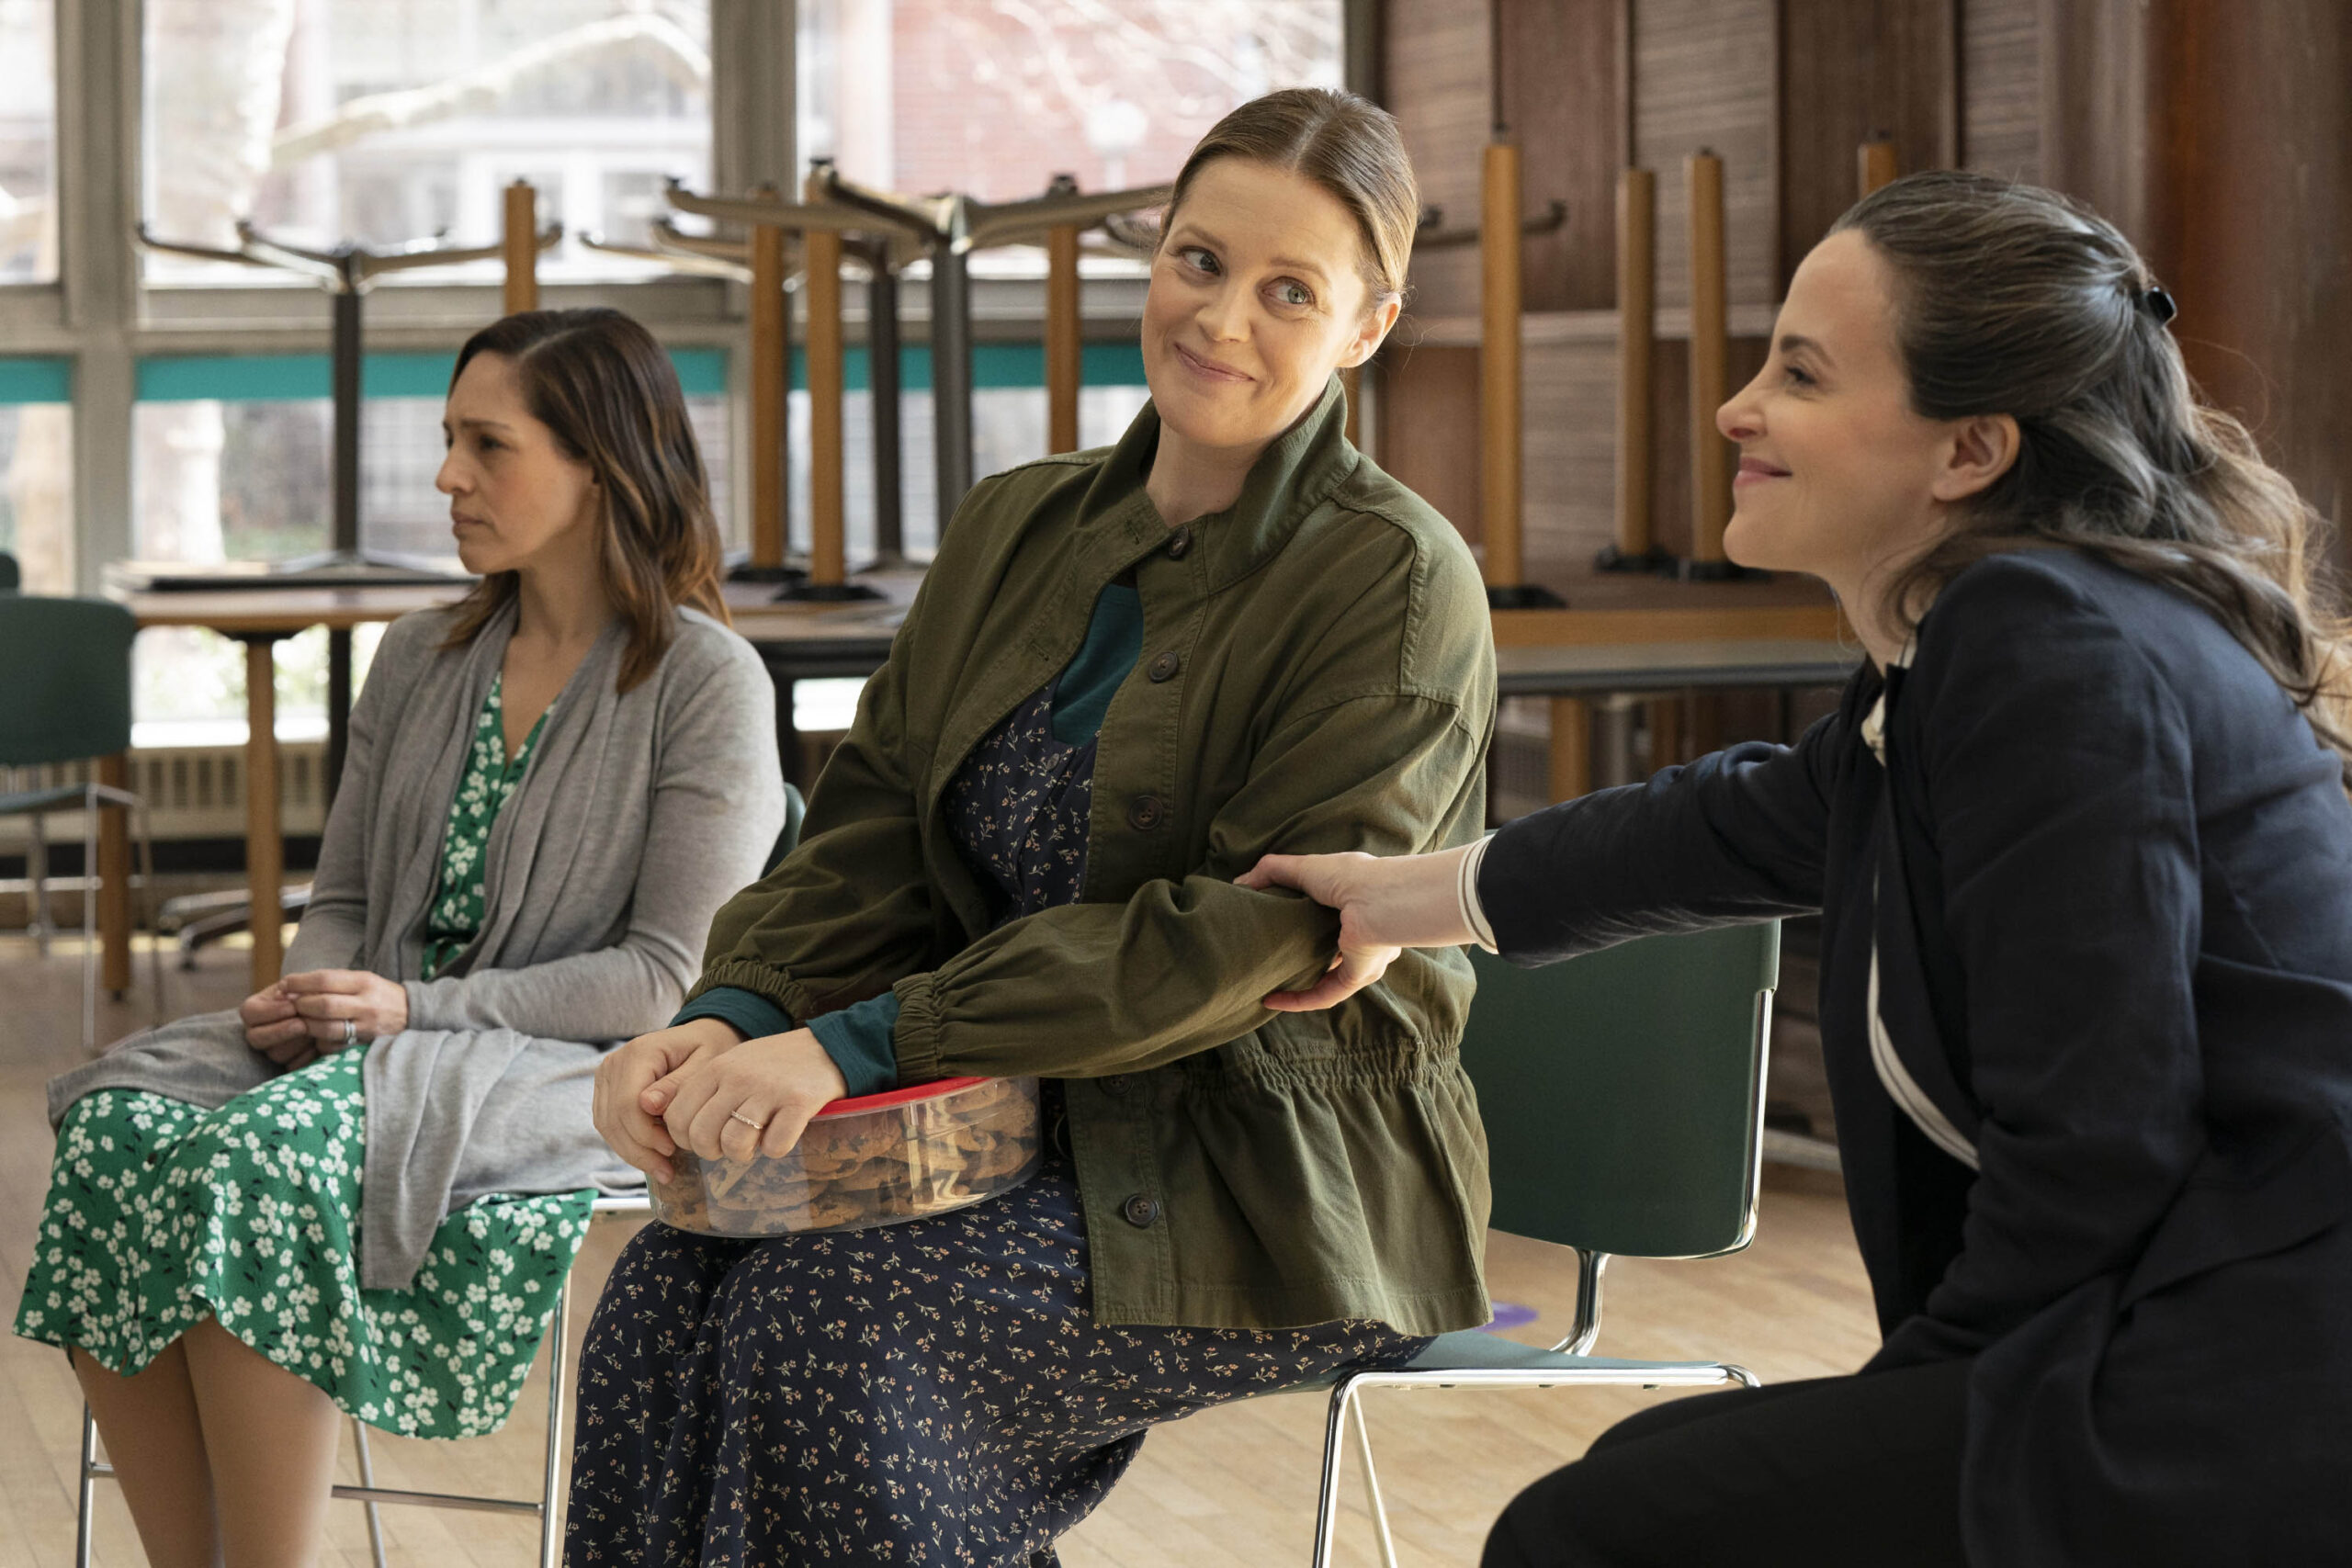 (S-D) Elizabeth Stanley come Julie, Maria Dizzia come Anne in New Amsterdam 3x11 'Things Fall Apart' [tag: Elizabeth Stanley, Maria Dizzia] [credit: Virginia Sherwood/NBC; 2021 NBCUniversal Media, LLC; courtesy of Mediaset]